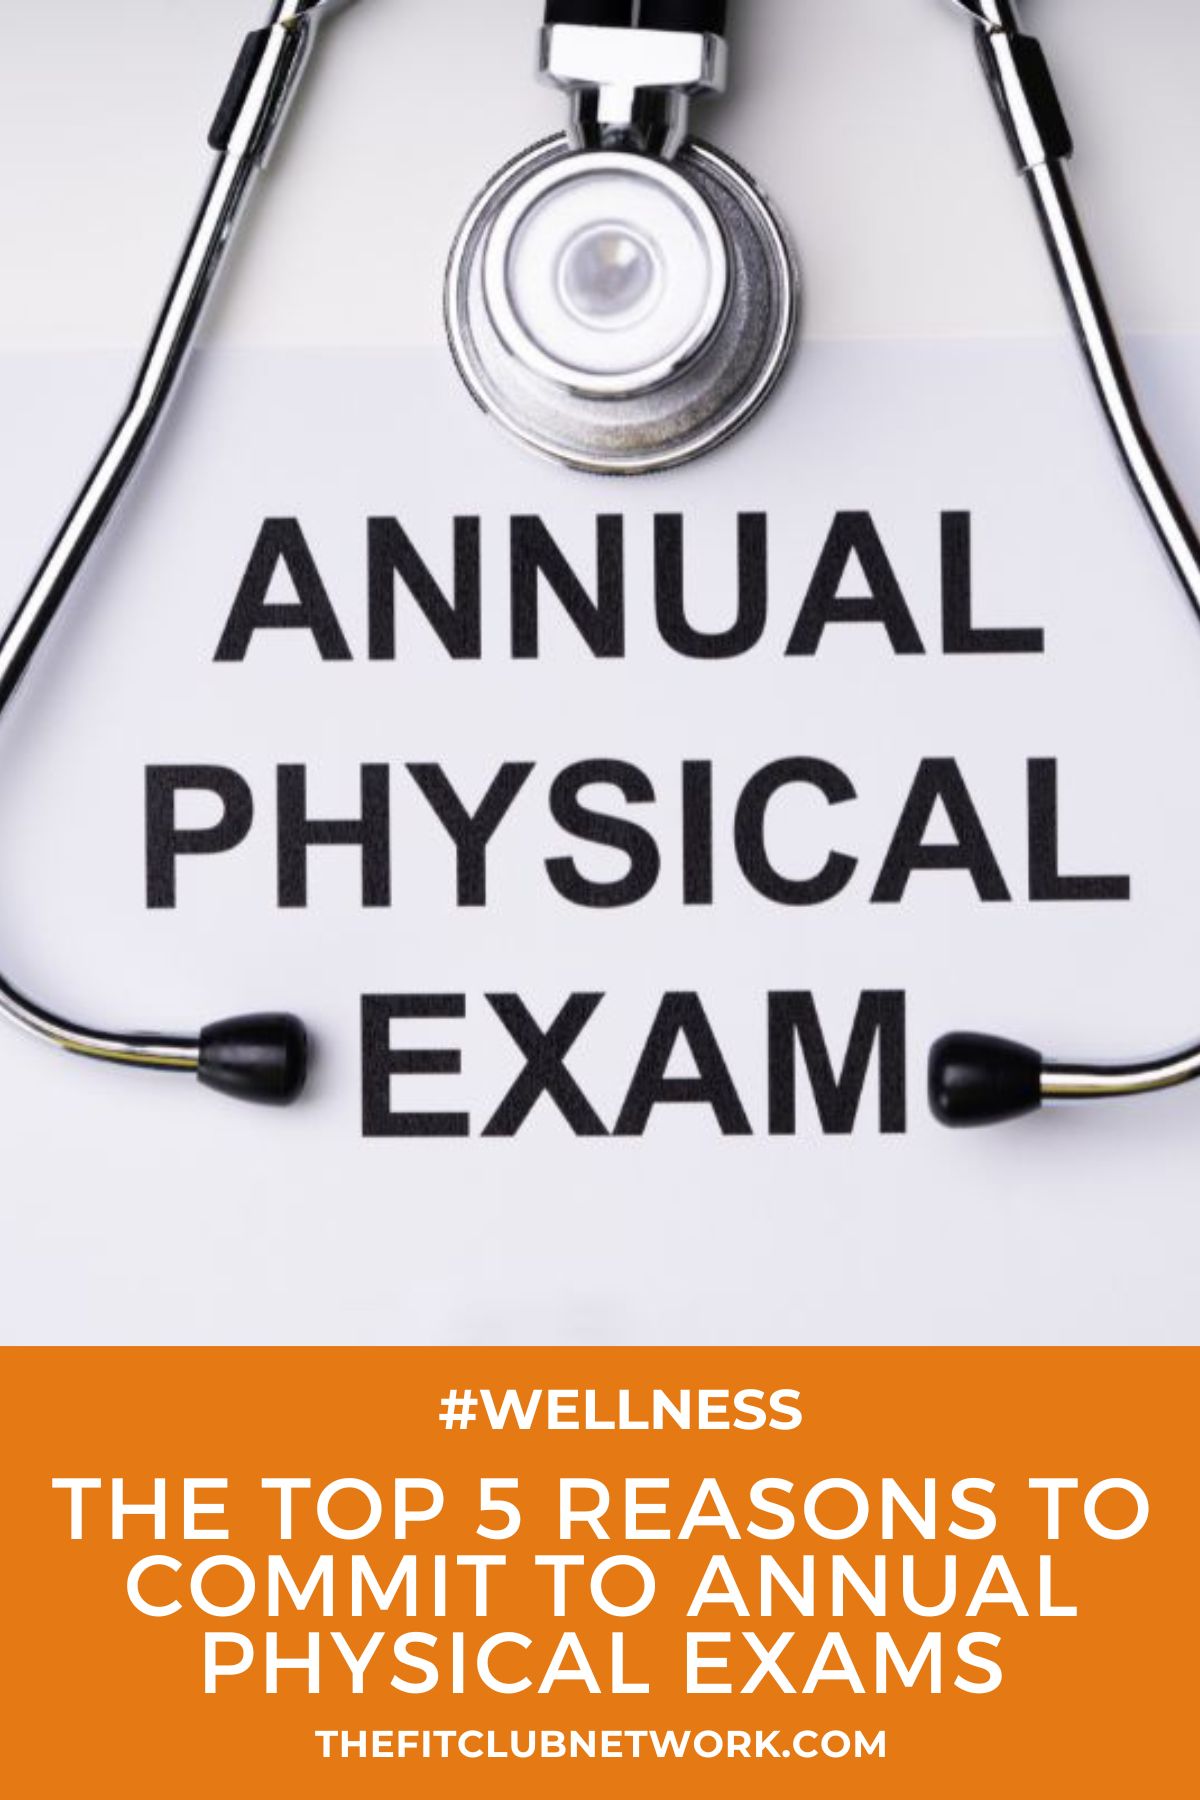 The Top 5 Reasons to Commit to Annual Physical Exams